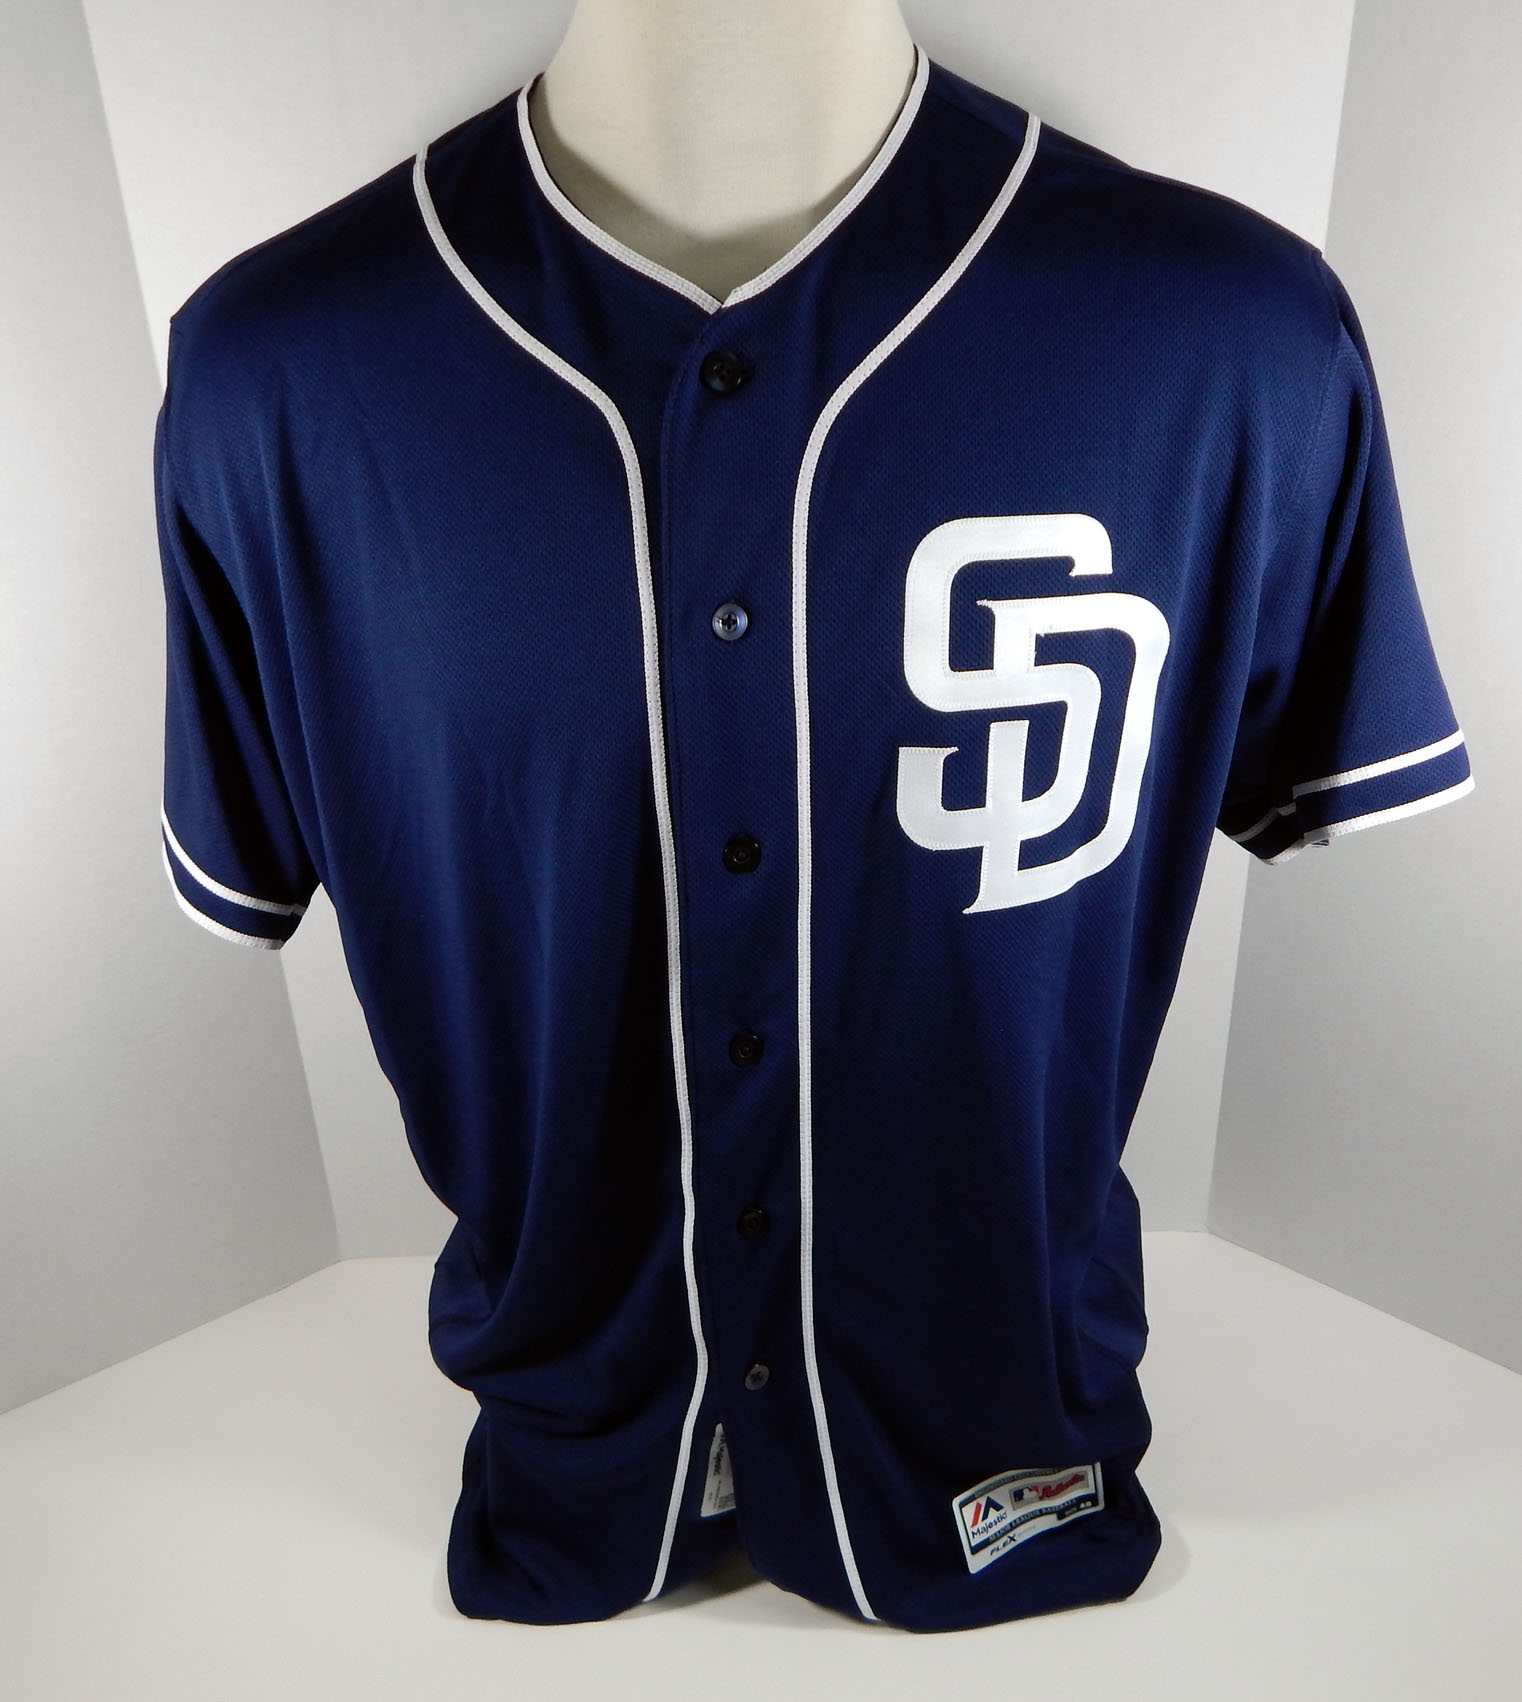 2017 San Diego Padres Christian Friedrich #53 Game Issued Navy Jersey SDP0589   eBay